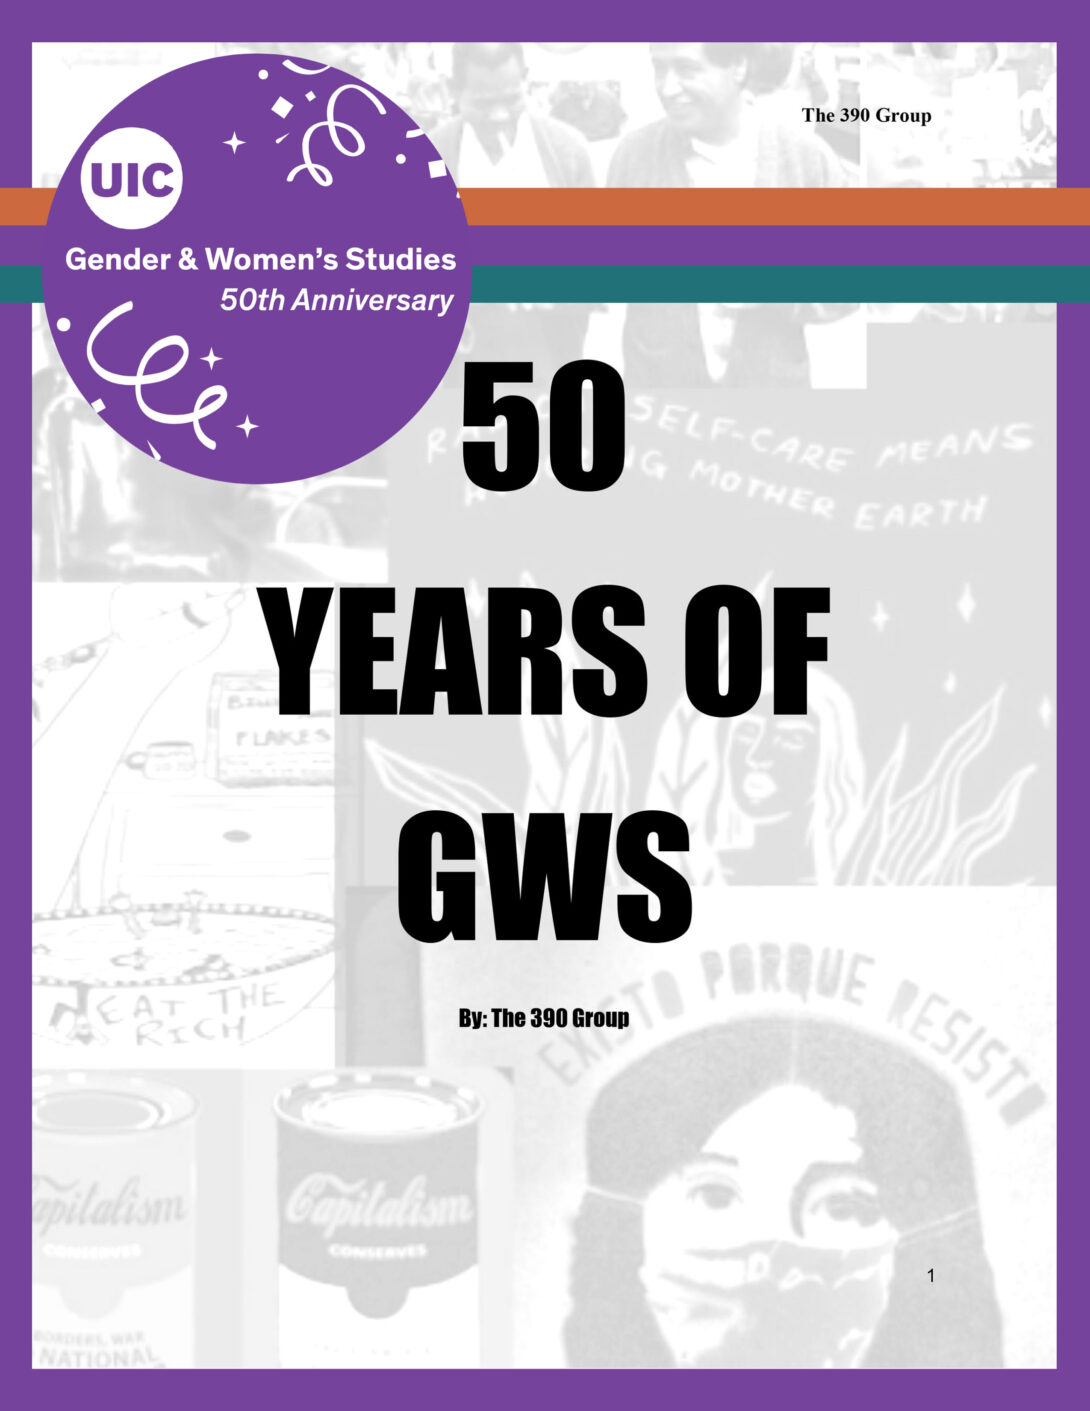 50 Years of GWS zine cover image: Depicts a black and white collage of images set against a purple background and a purple GWS logo. There is a stripe of orange, pine blue-green, and purple stretching across the entire image.